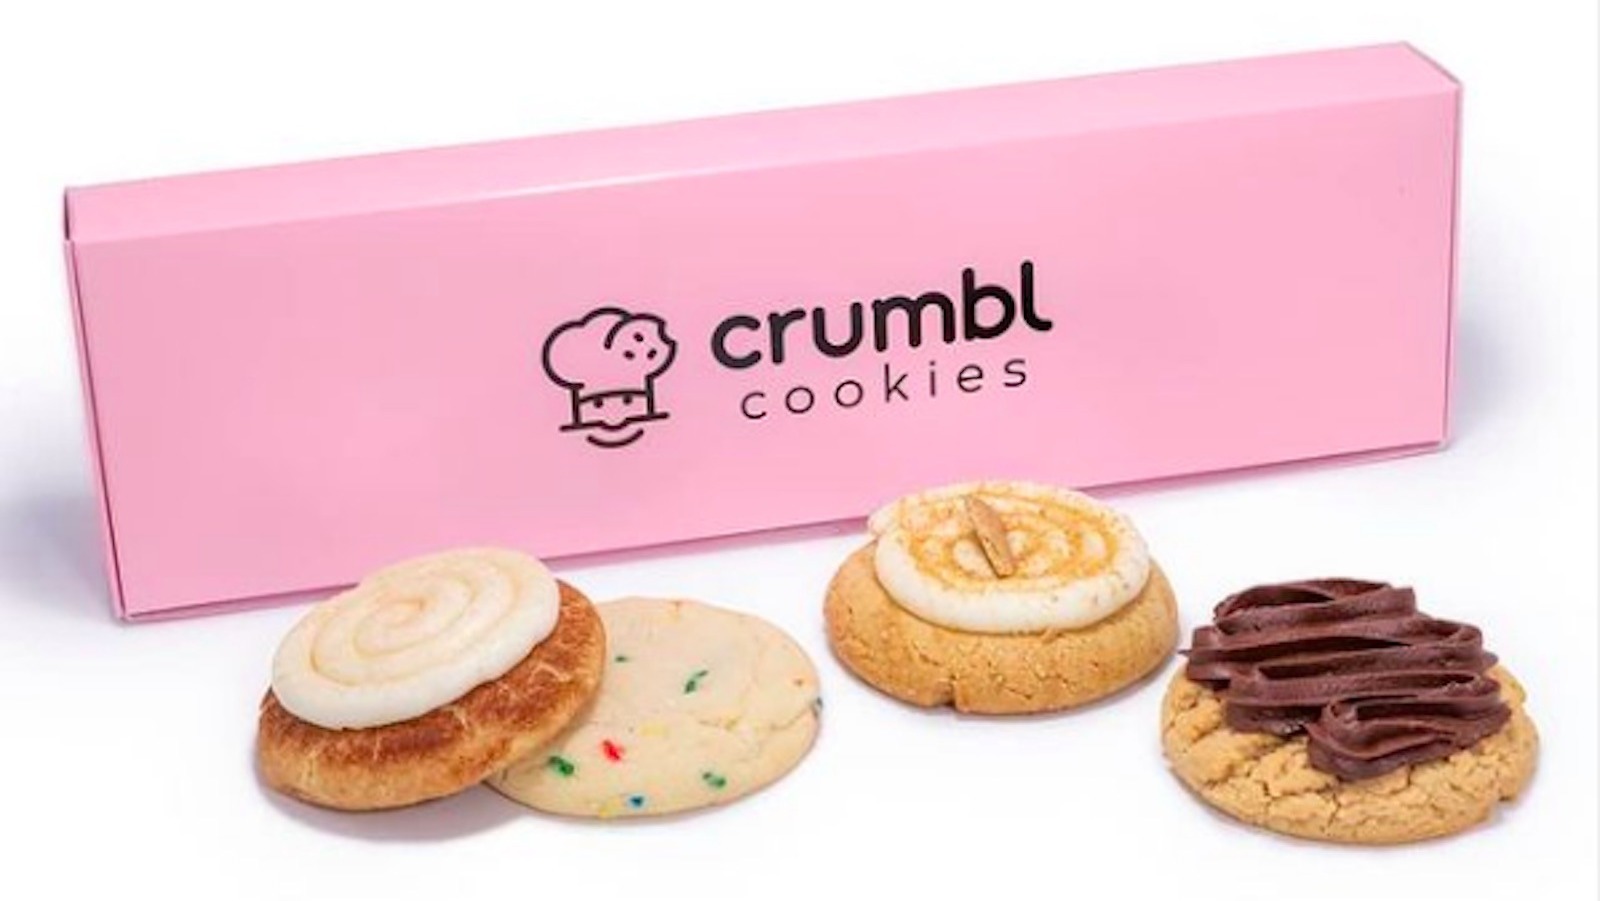 crumbl-cookies-founders-dish-on-the-chain-s-viral-success-exclusive-interview